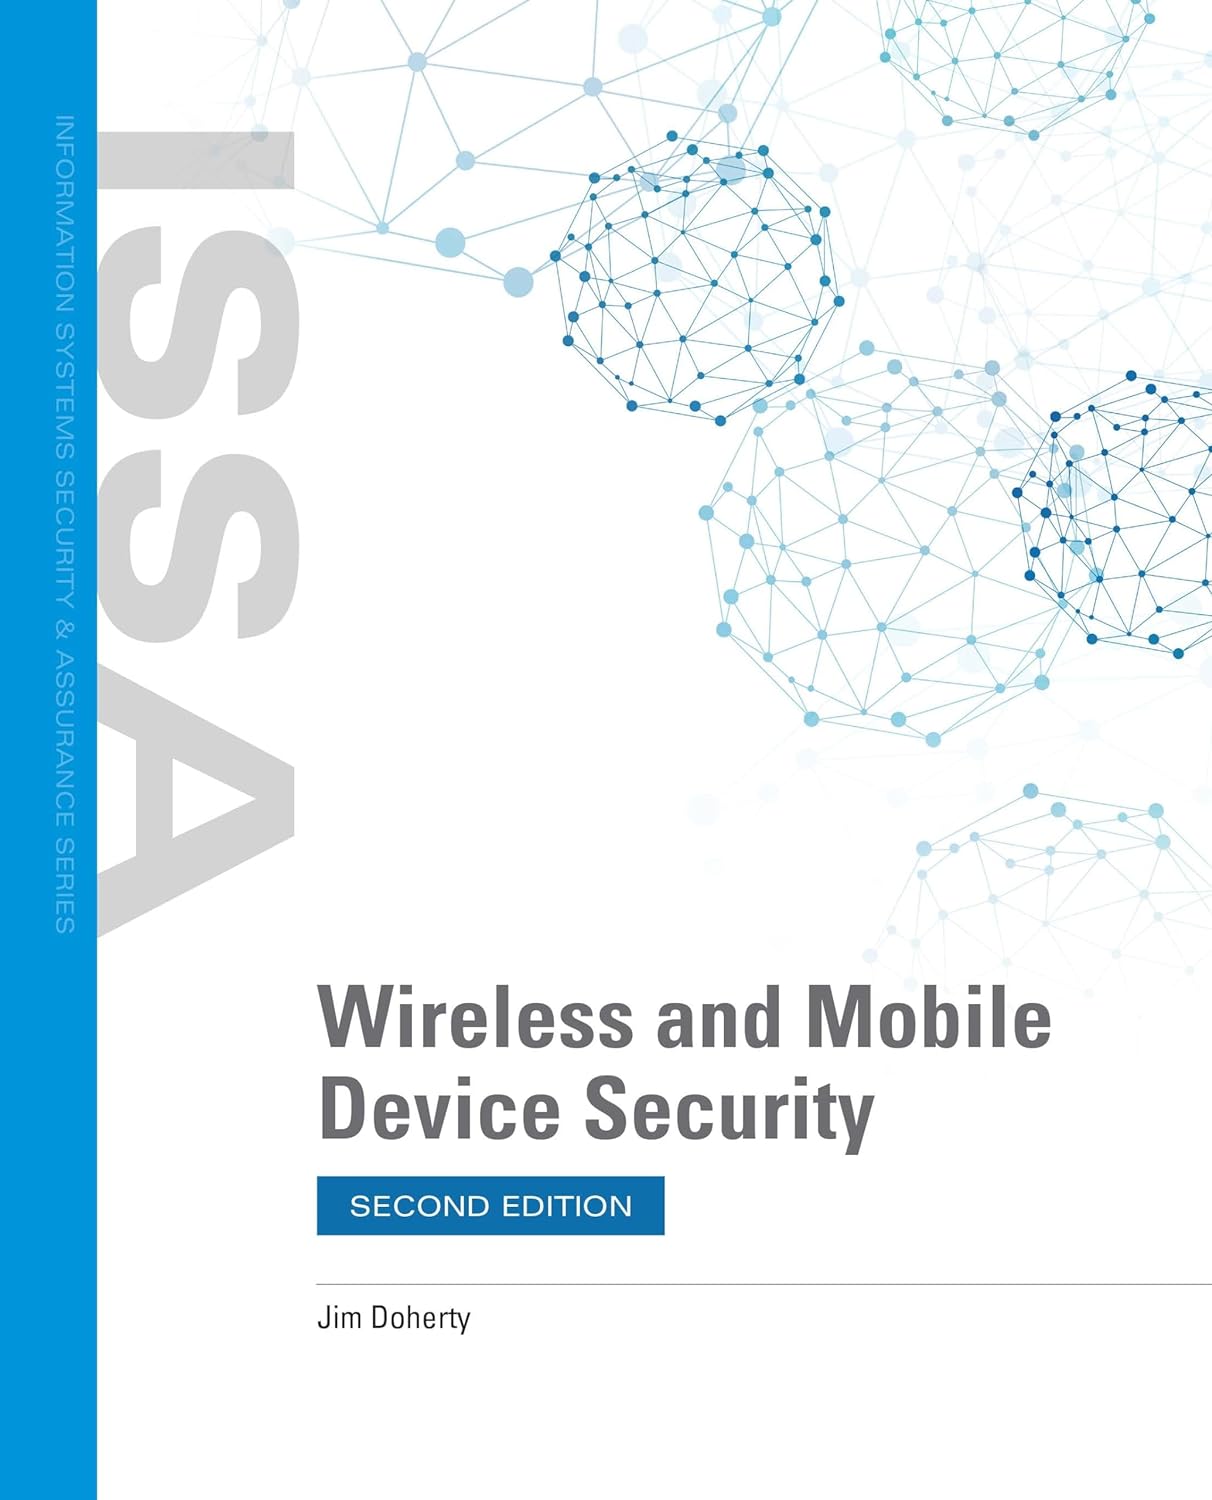 a picture showing the cover image of the test bank/practice questions for the book 'Wireless and Mobile Device Security'